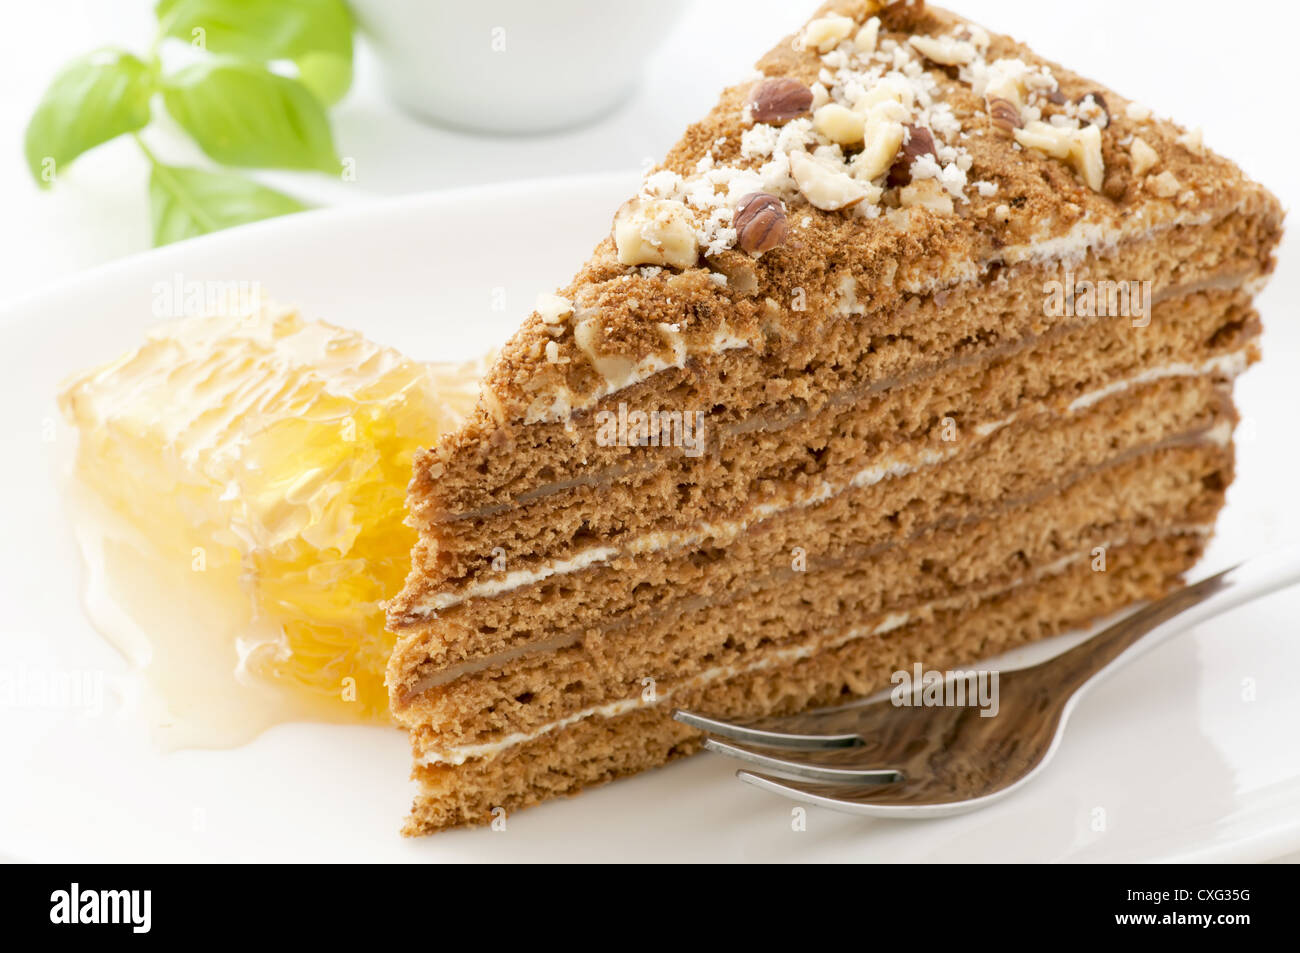 Honey cake with honeycomb as closeup on a white plate Stock Photo